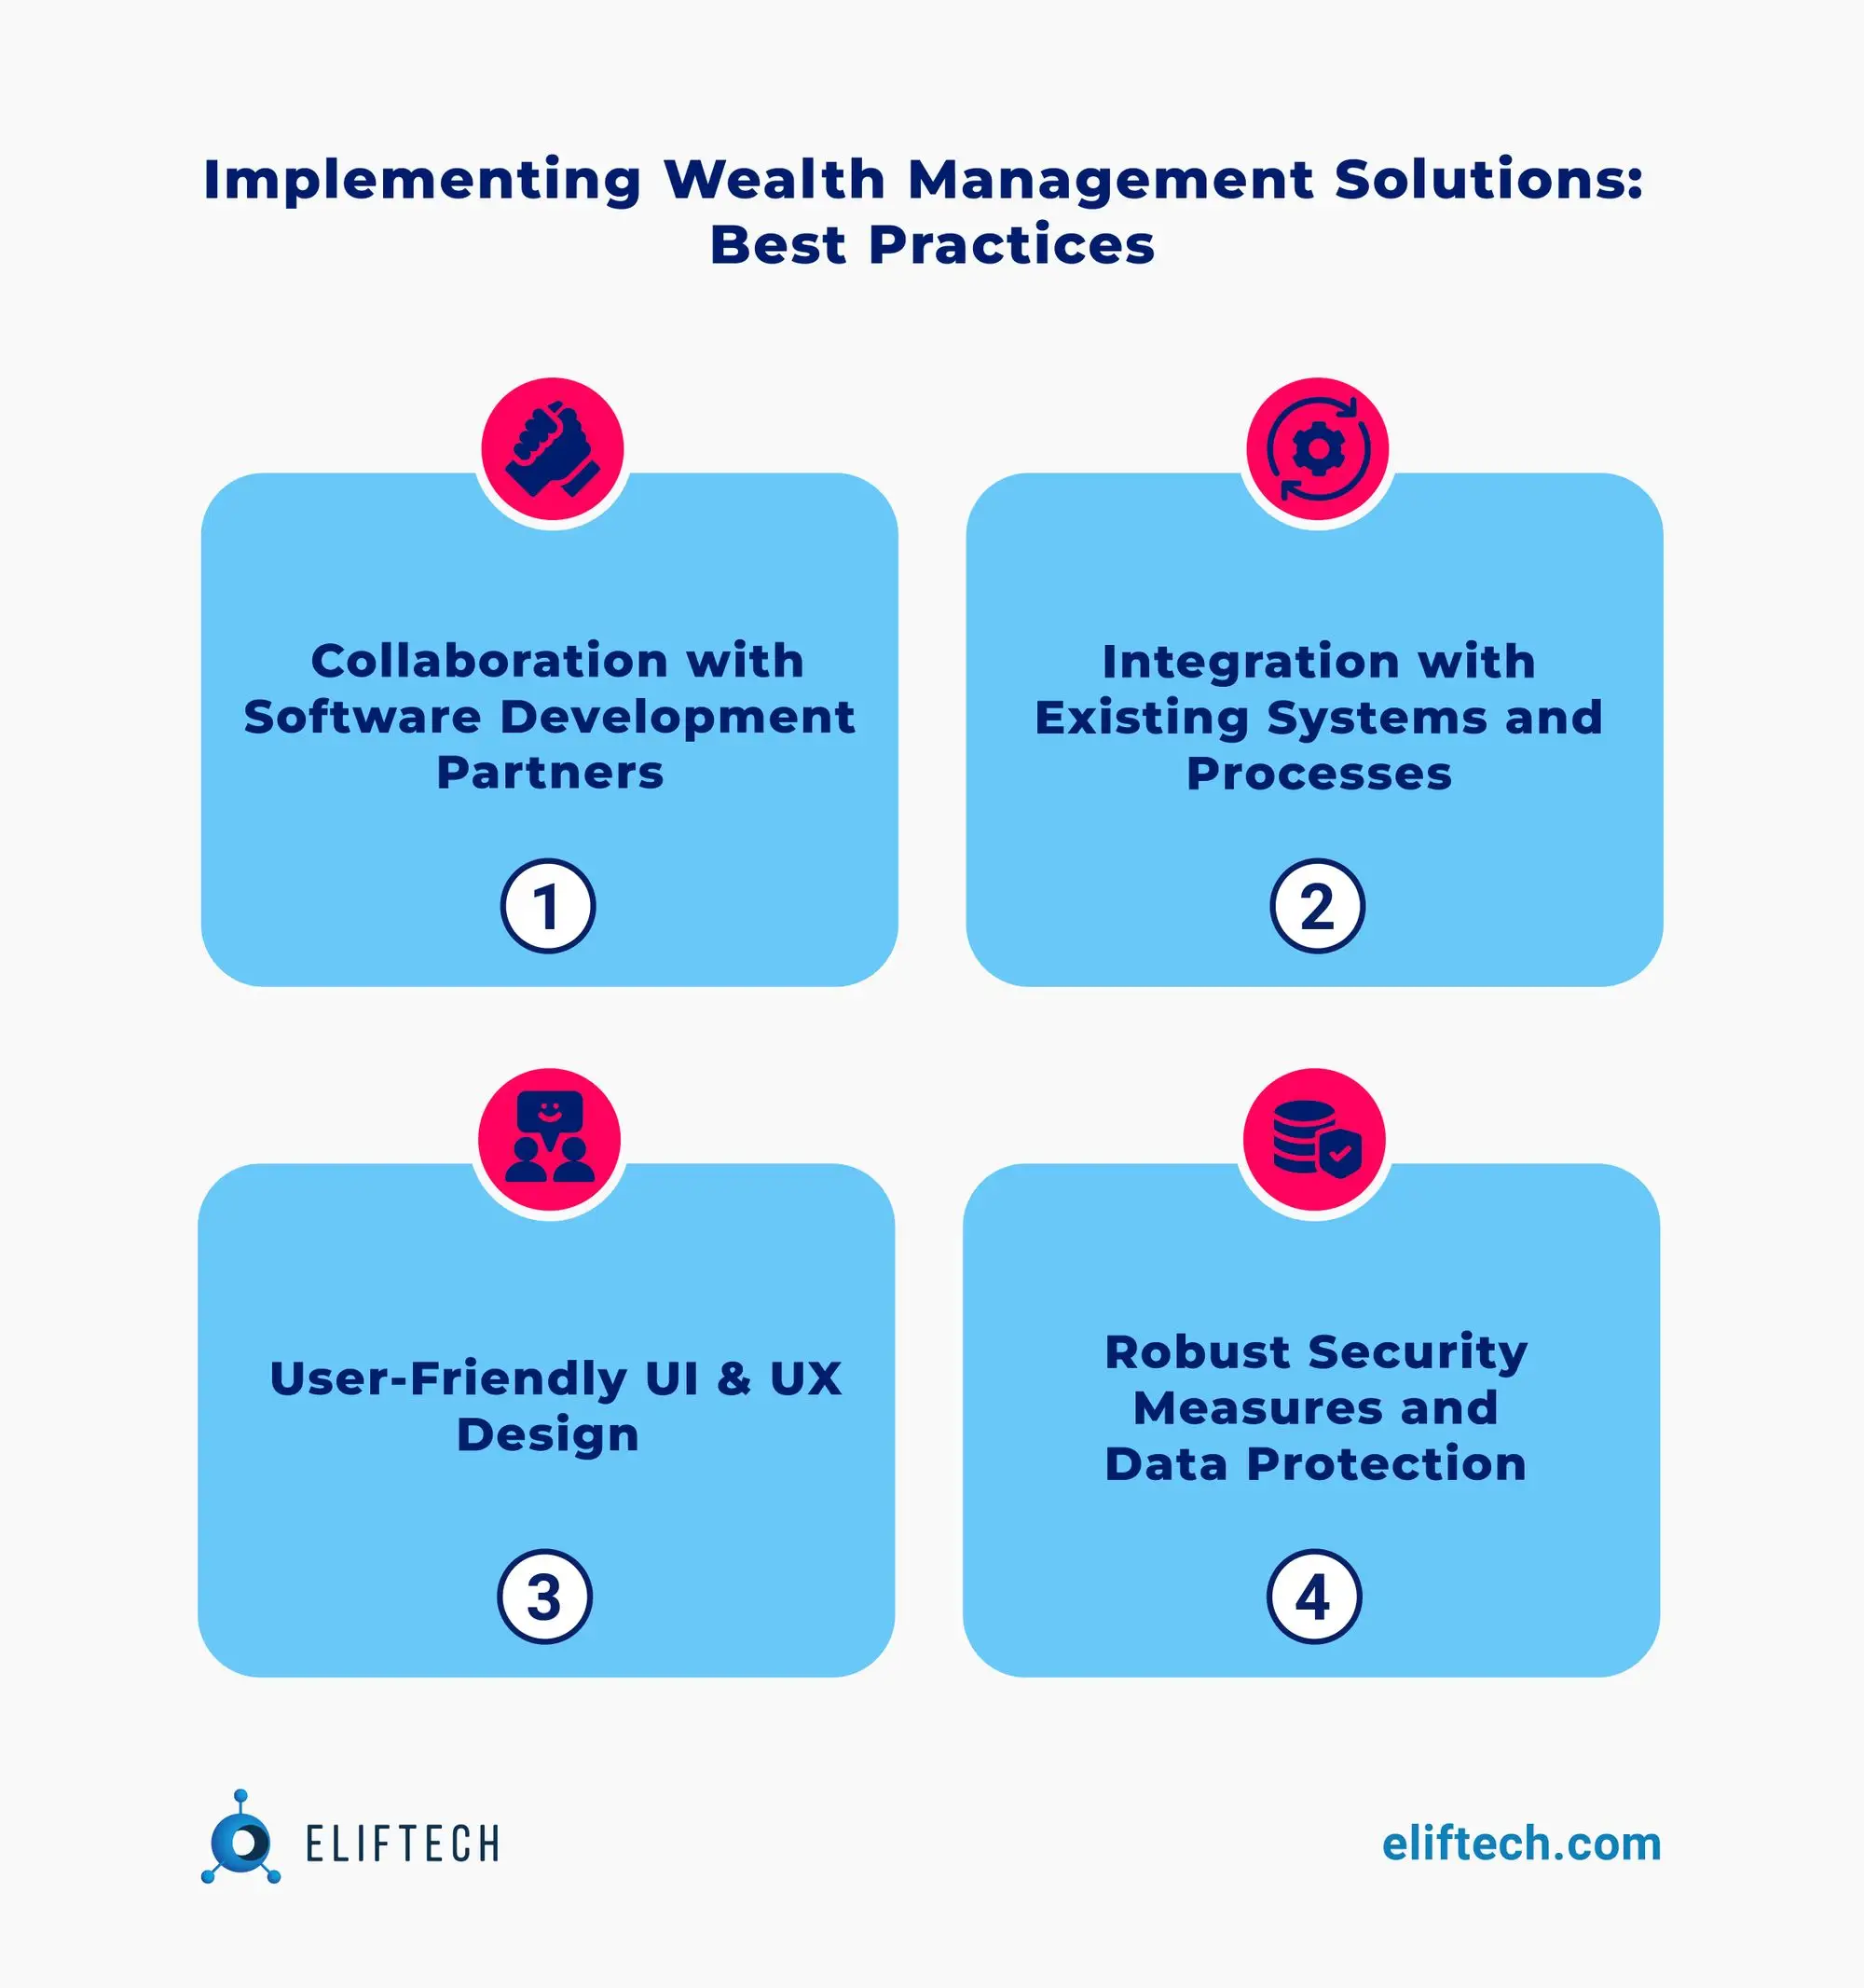 Implementing Wealth Management Solutions: Best Practices